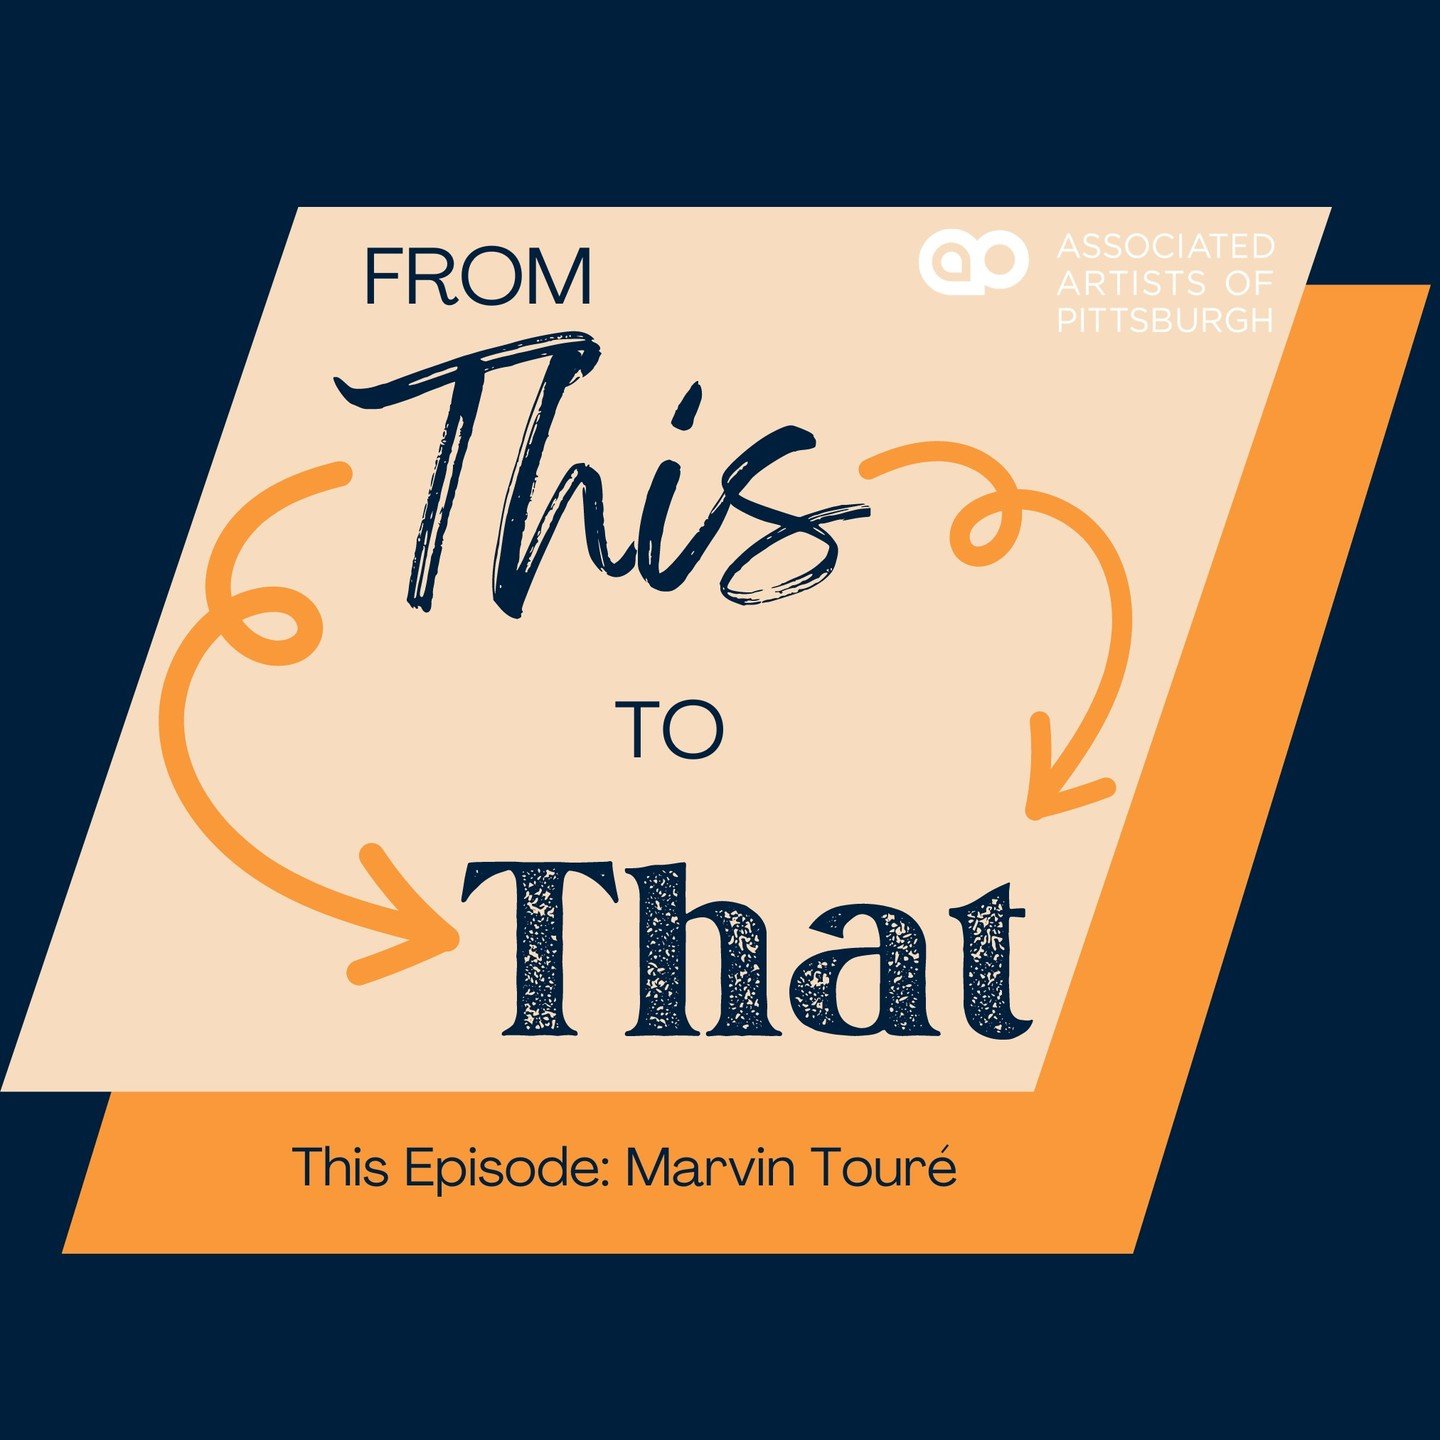 The first episode of the AAP podcast, From This to That, is available to stream now! 

For the first episode of From This to That, we talk to Marvin Tour&eacute;. @marvintoure is an Ivorian-American artist who uses fictional narratives and the object